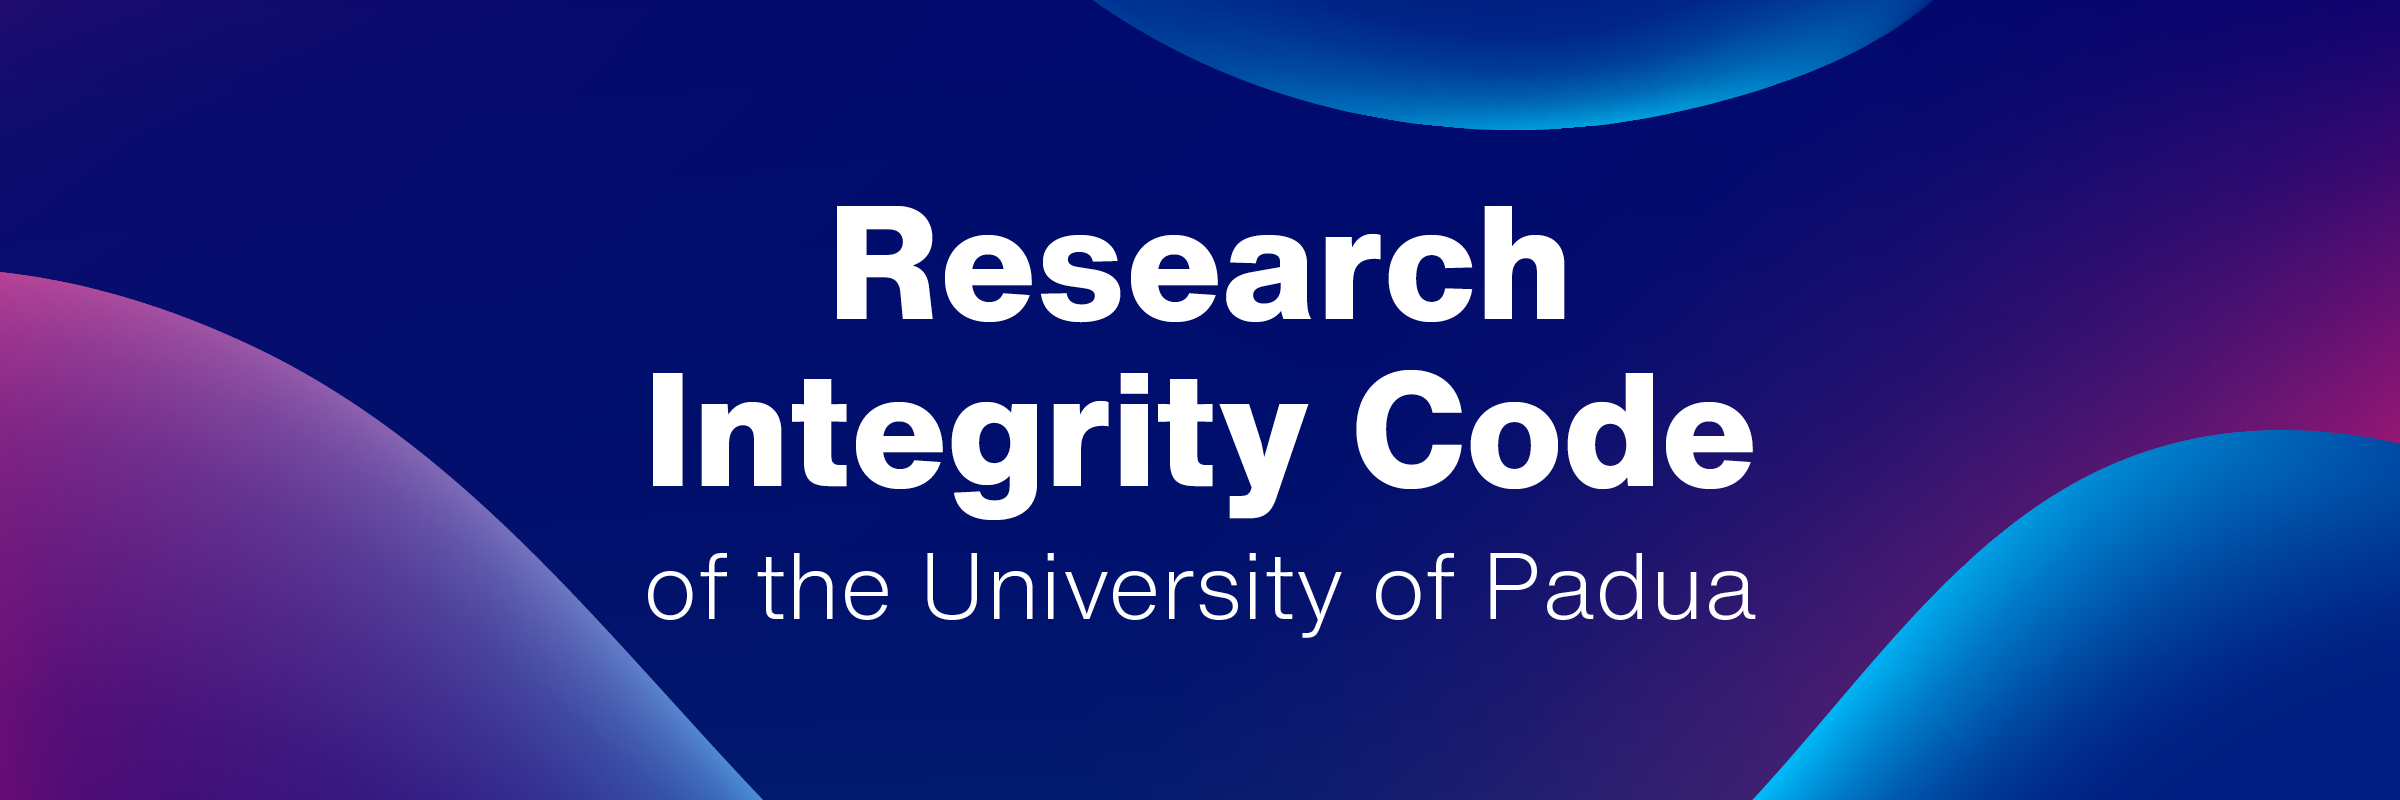 Research Integrity Code of the University of Padua